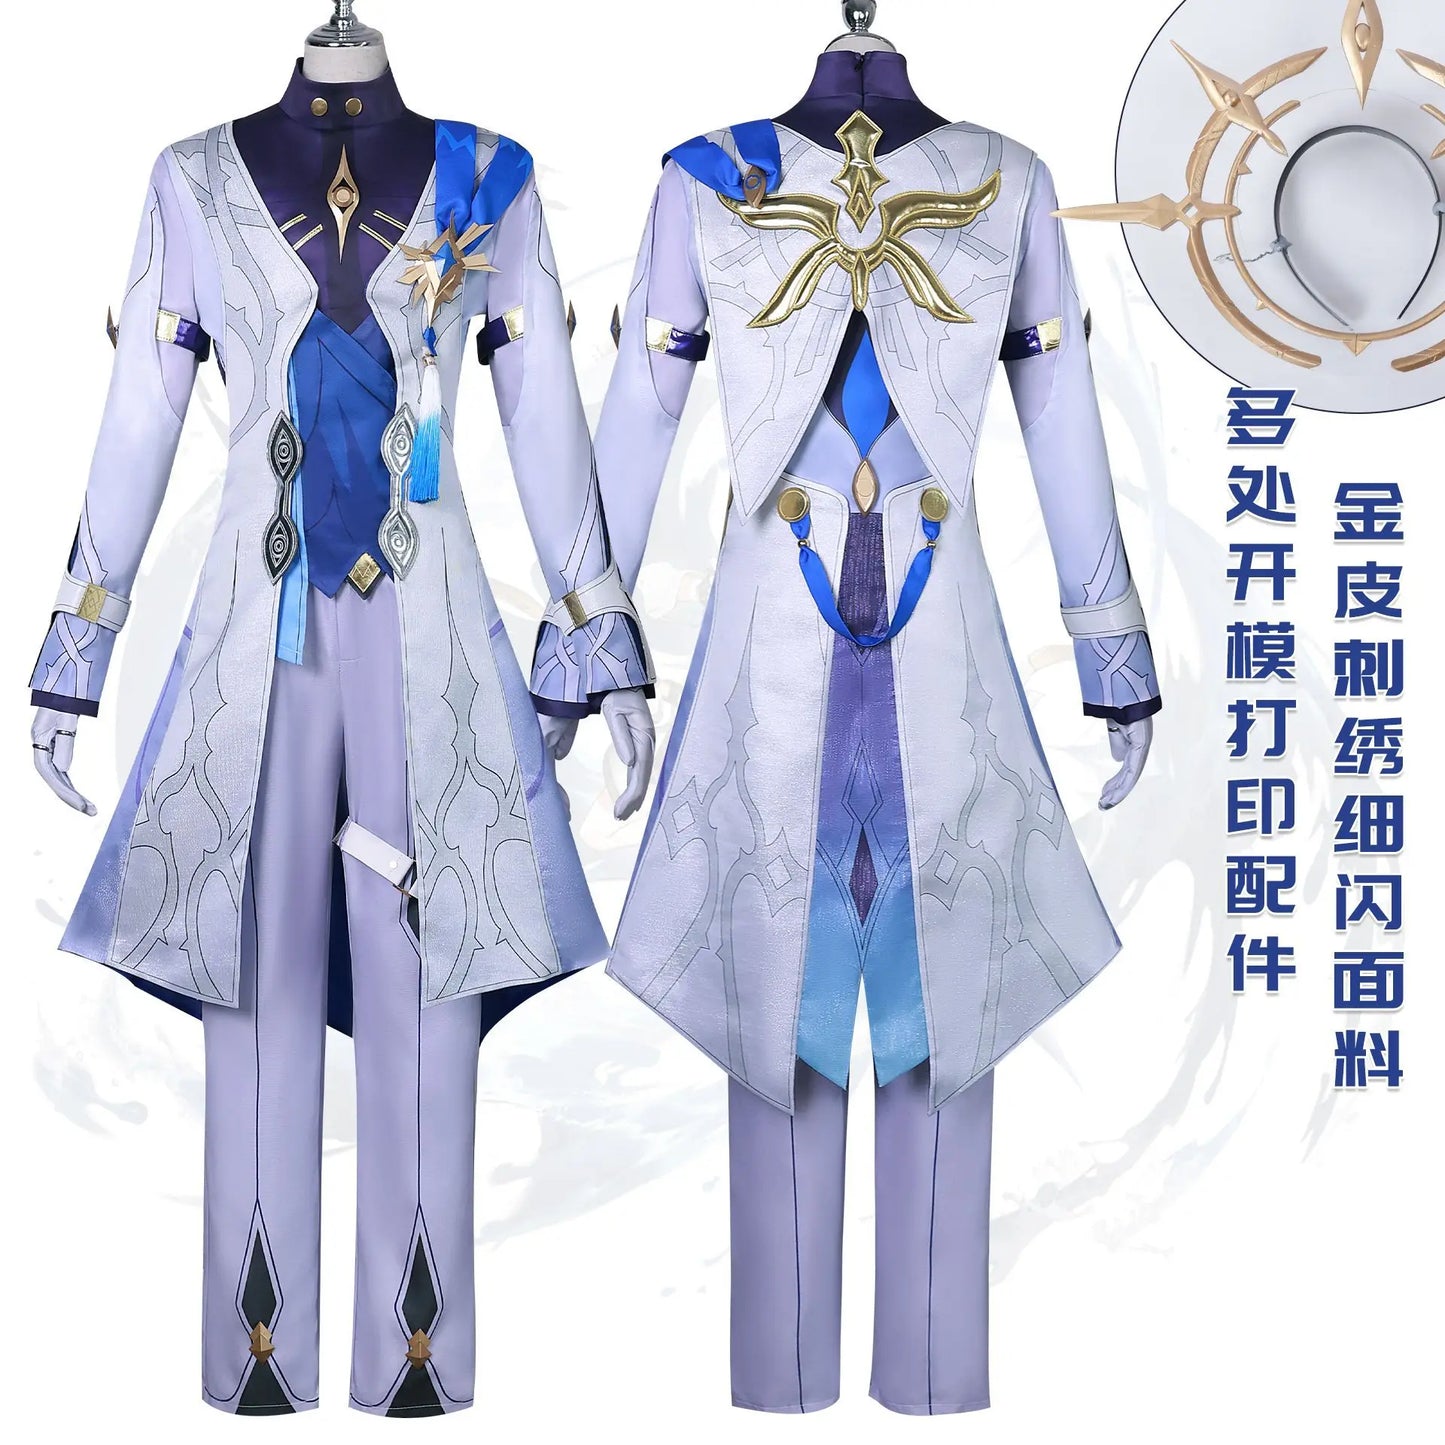 Sunday Cosplay Costume Game Honkai Star Rail Mr. Sunday Cosplay Costume Uniform Outfits Wig Shoes Prop Anime Role Play Suits